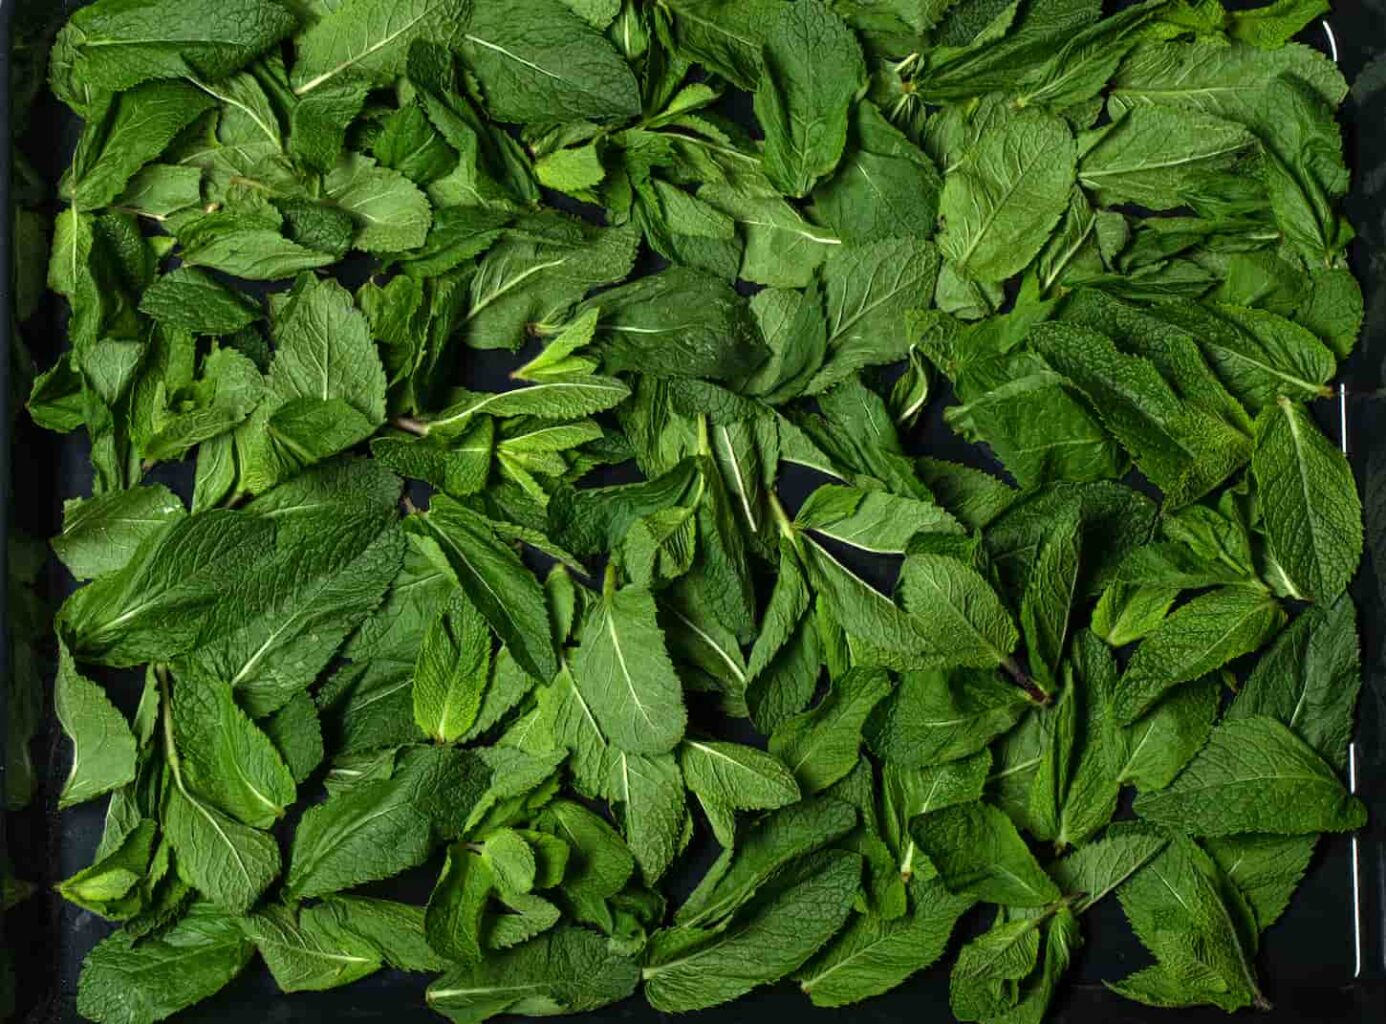 An image of green mint under a process of herb drying.